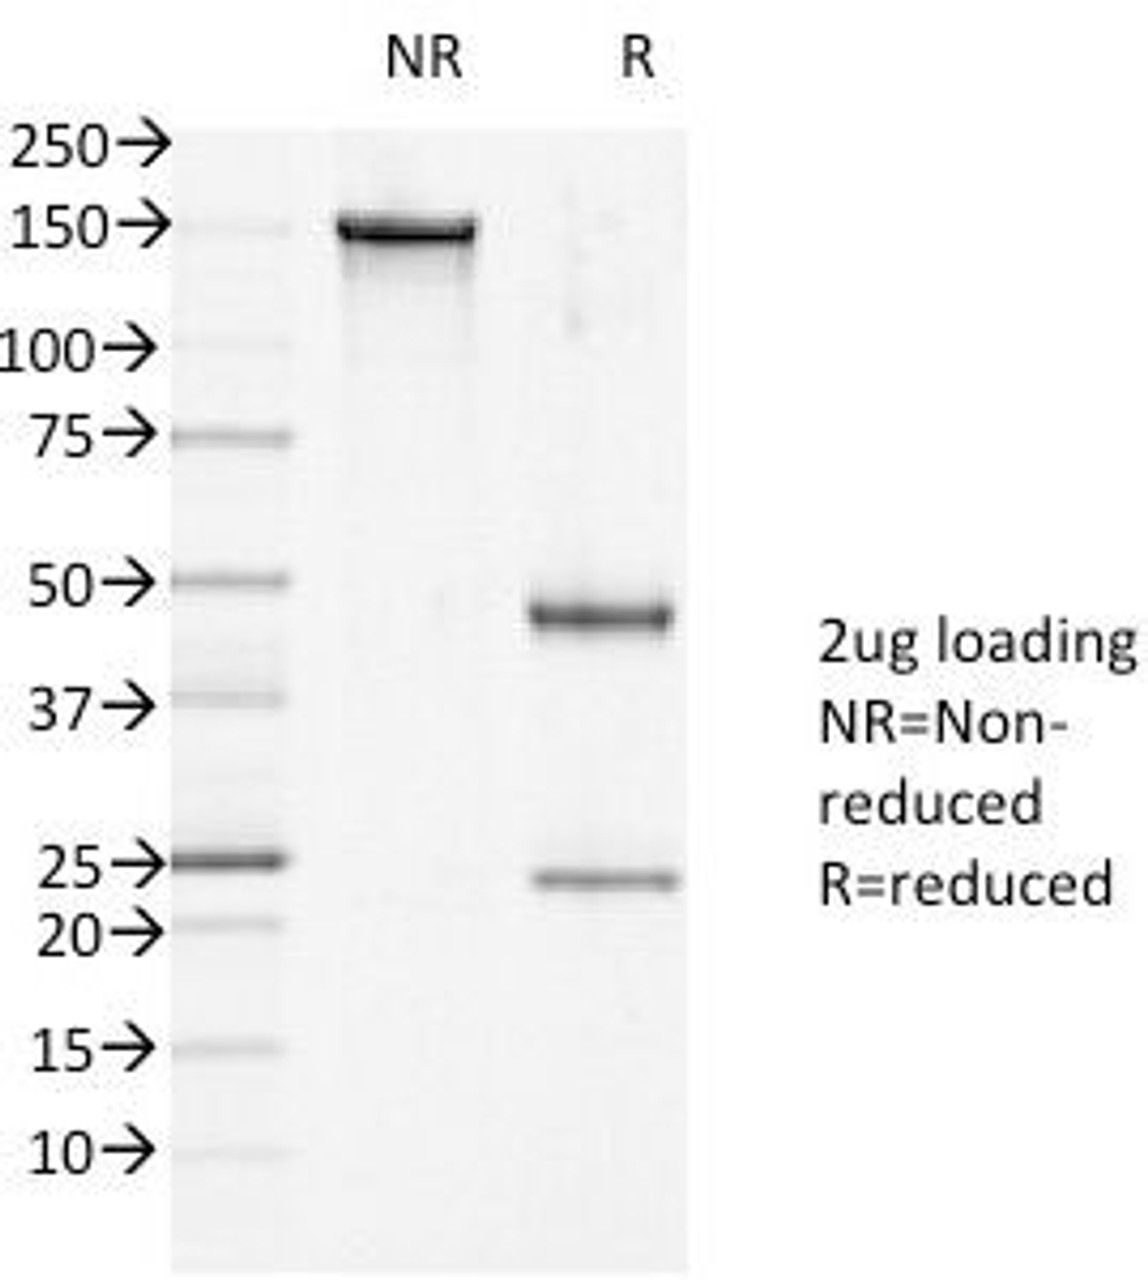 SDS-PAGE Analysis of Purified, BSA-Free DSG1 Antibody (clone 27B2) . Confirmation of Integrity and Purity of the Antibody.